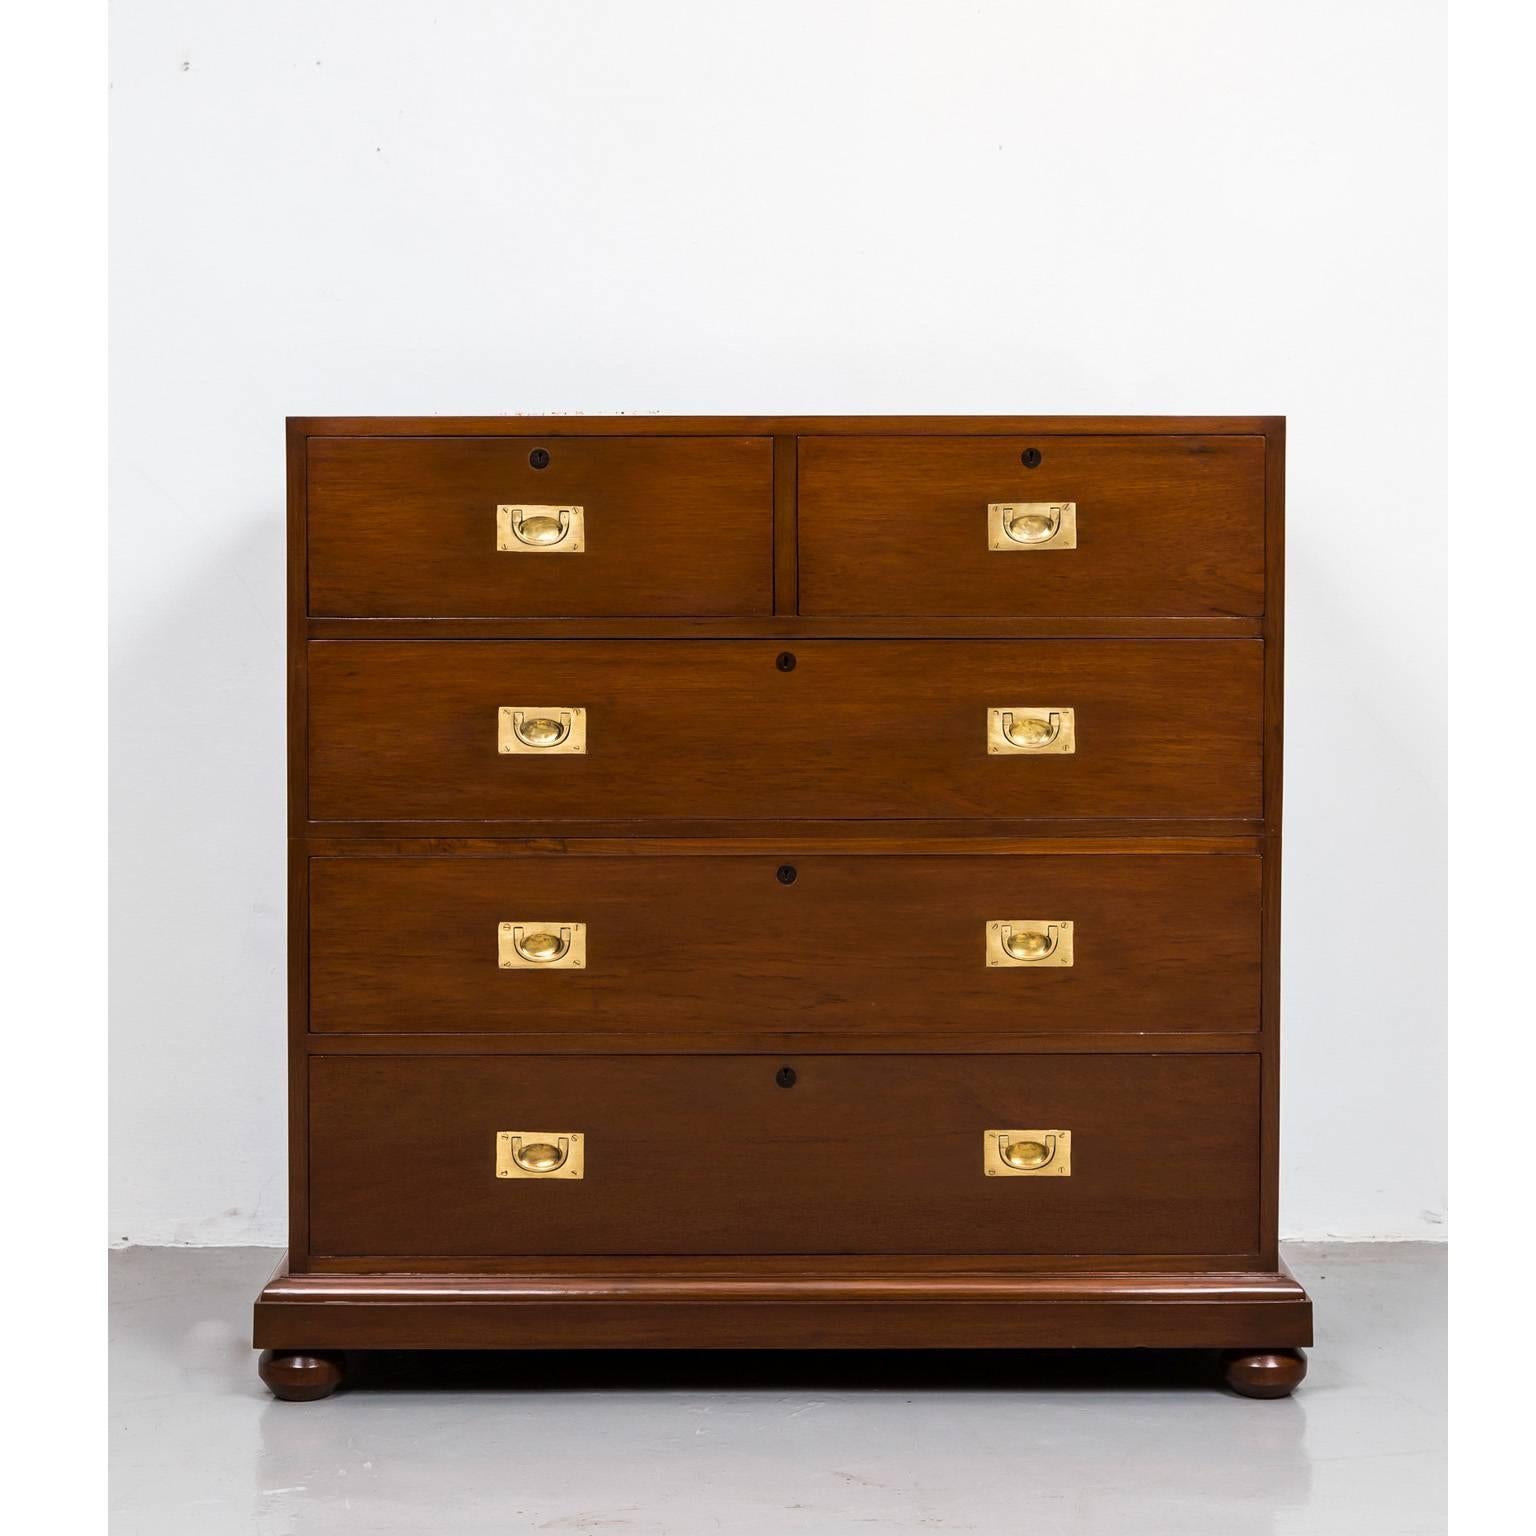 A British Colonial Campaign chest of drawers made of teakwood. Like the majority of Campaign chests, the present example has brass lift handles on the sides and can be split in two parts for ease of transport. The top section has two short drawers